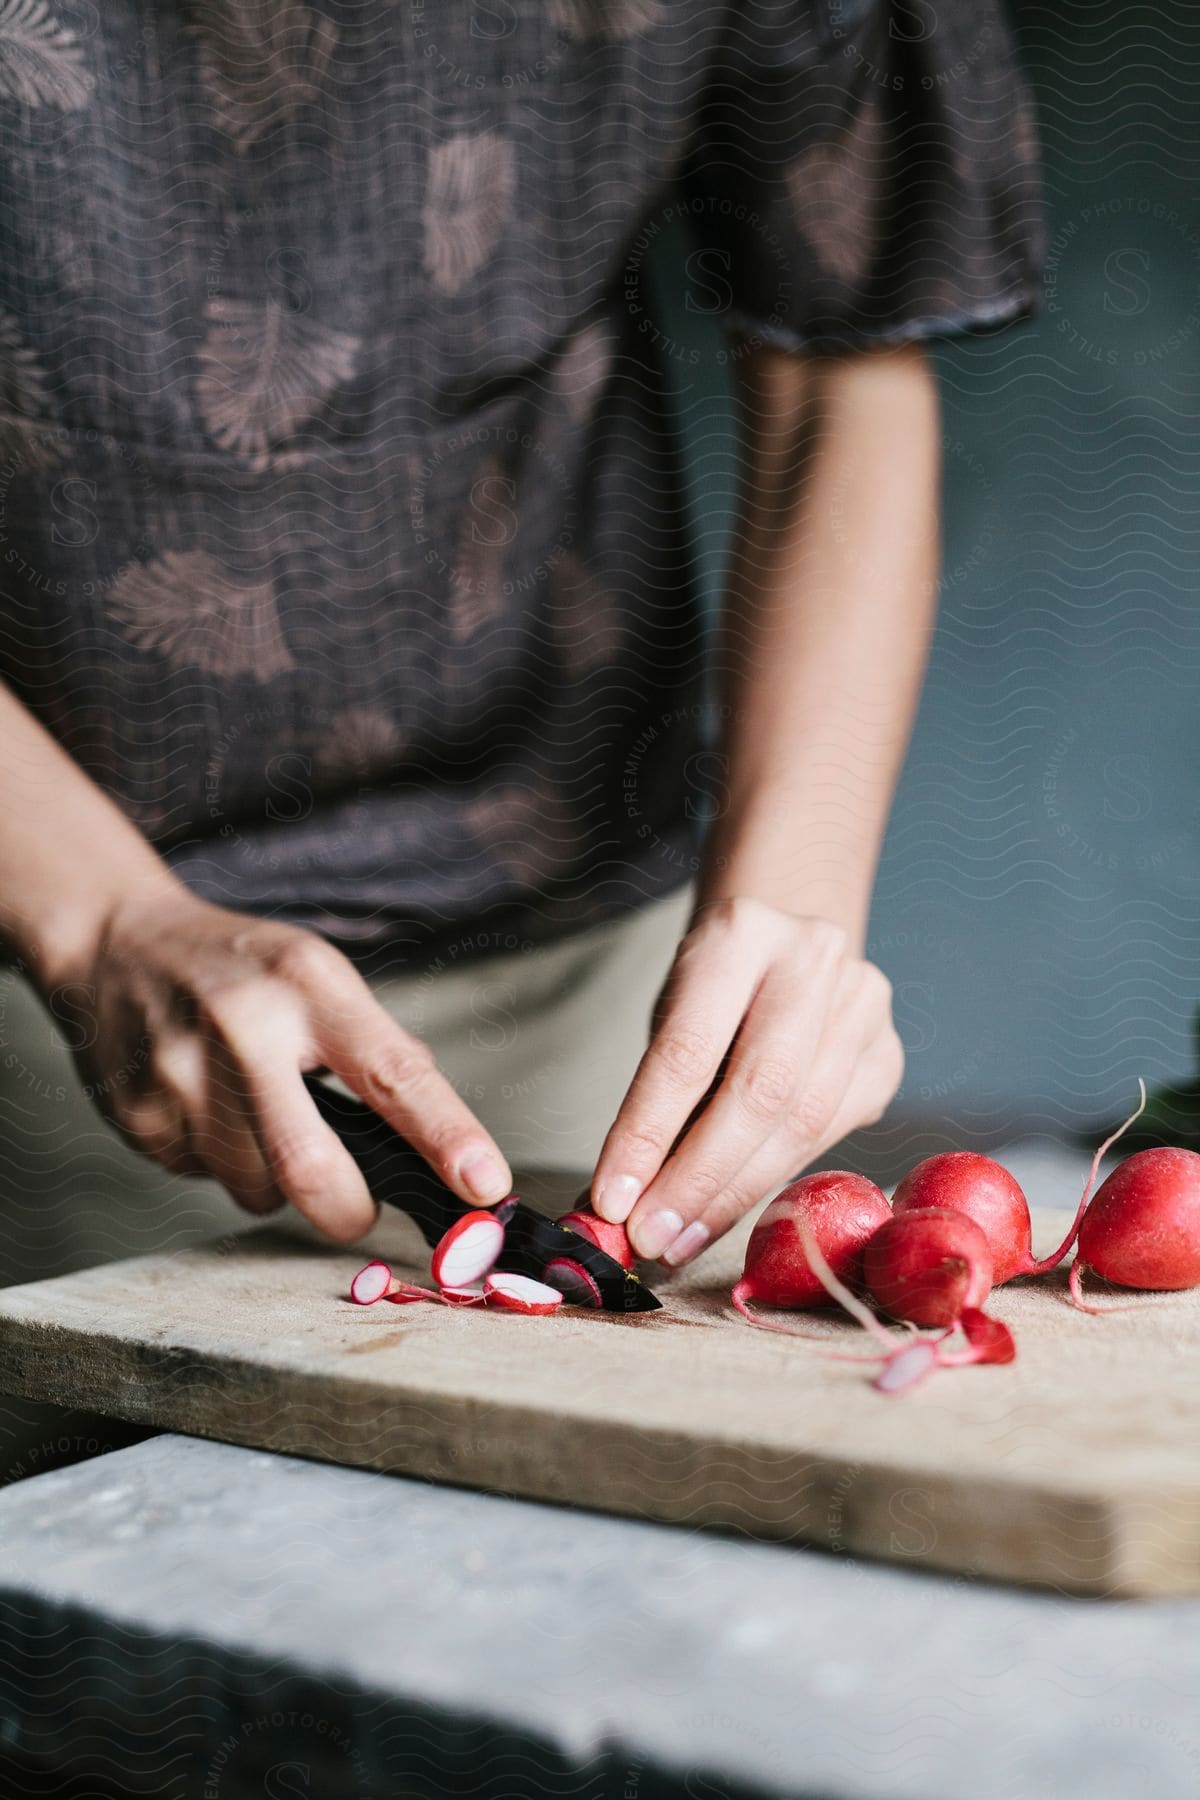 A person cuts radishes with a tiny knife on a cutting board